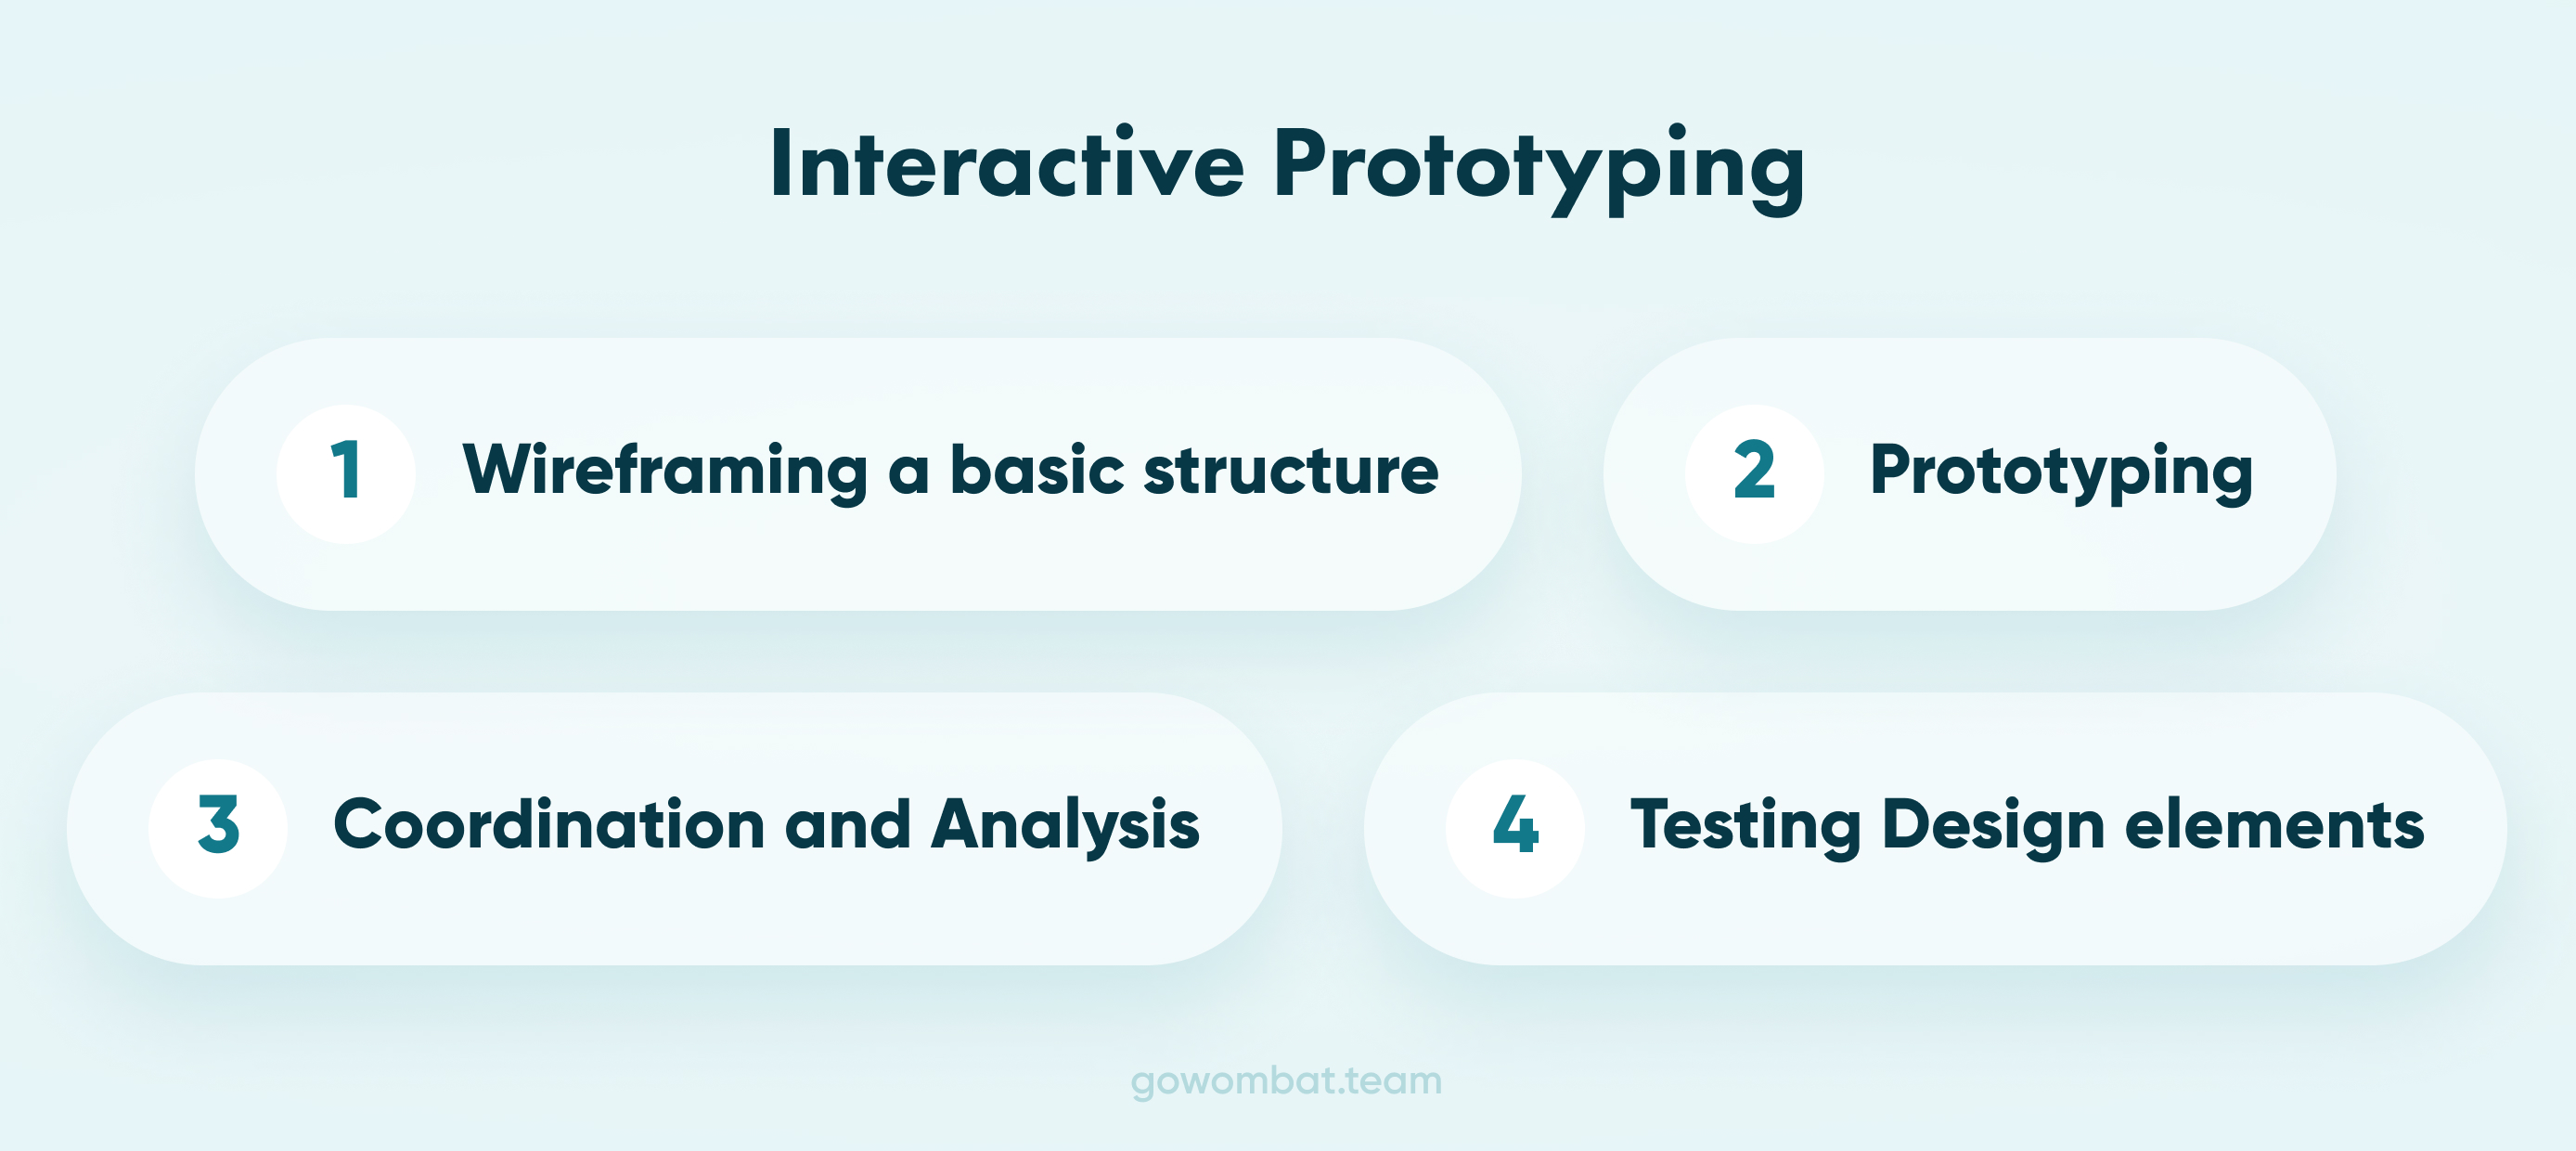 A simple breakdown of an Interactive Prototyping process.